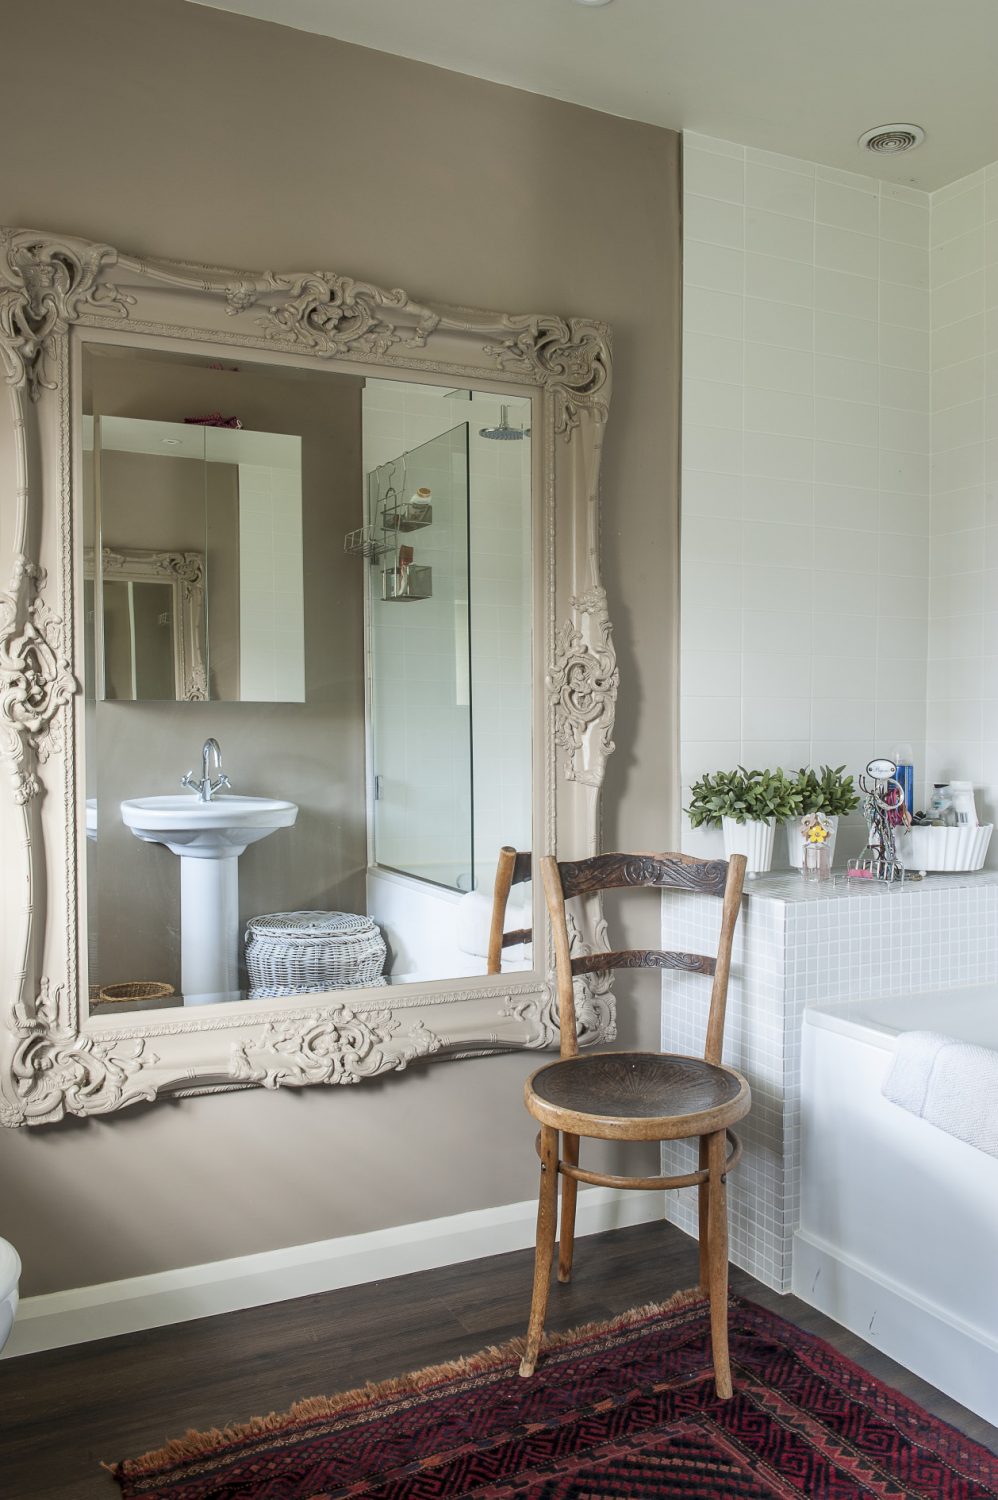 In the en suite, the frame of a large ornate mirror from Blooms has been very effectively painted the same F&B as the walls